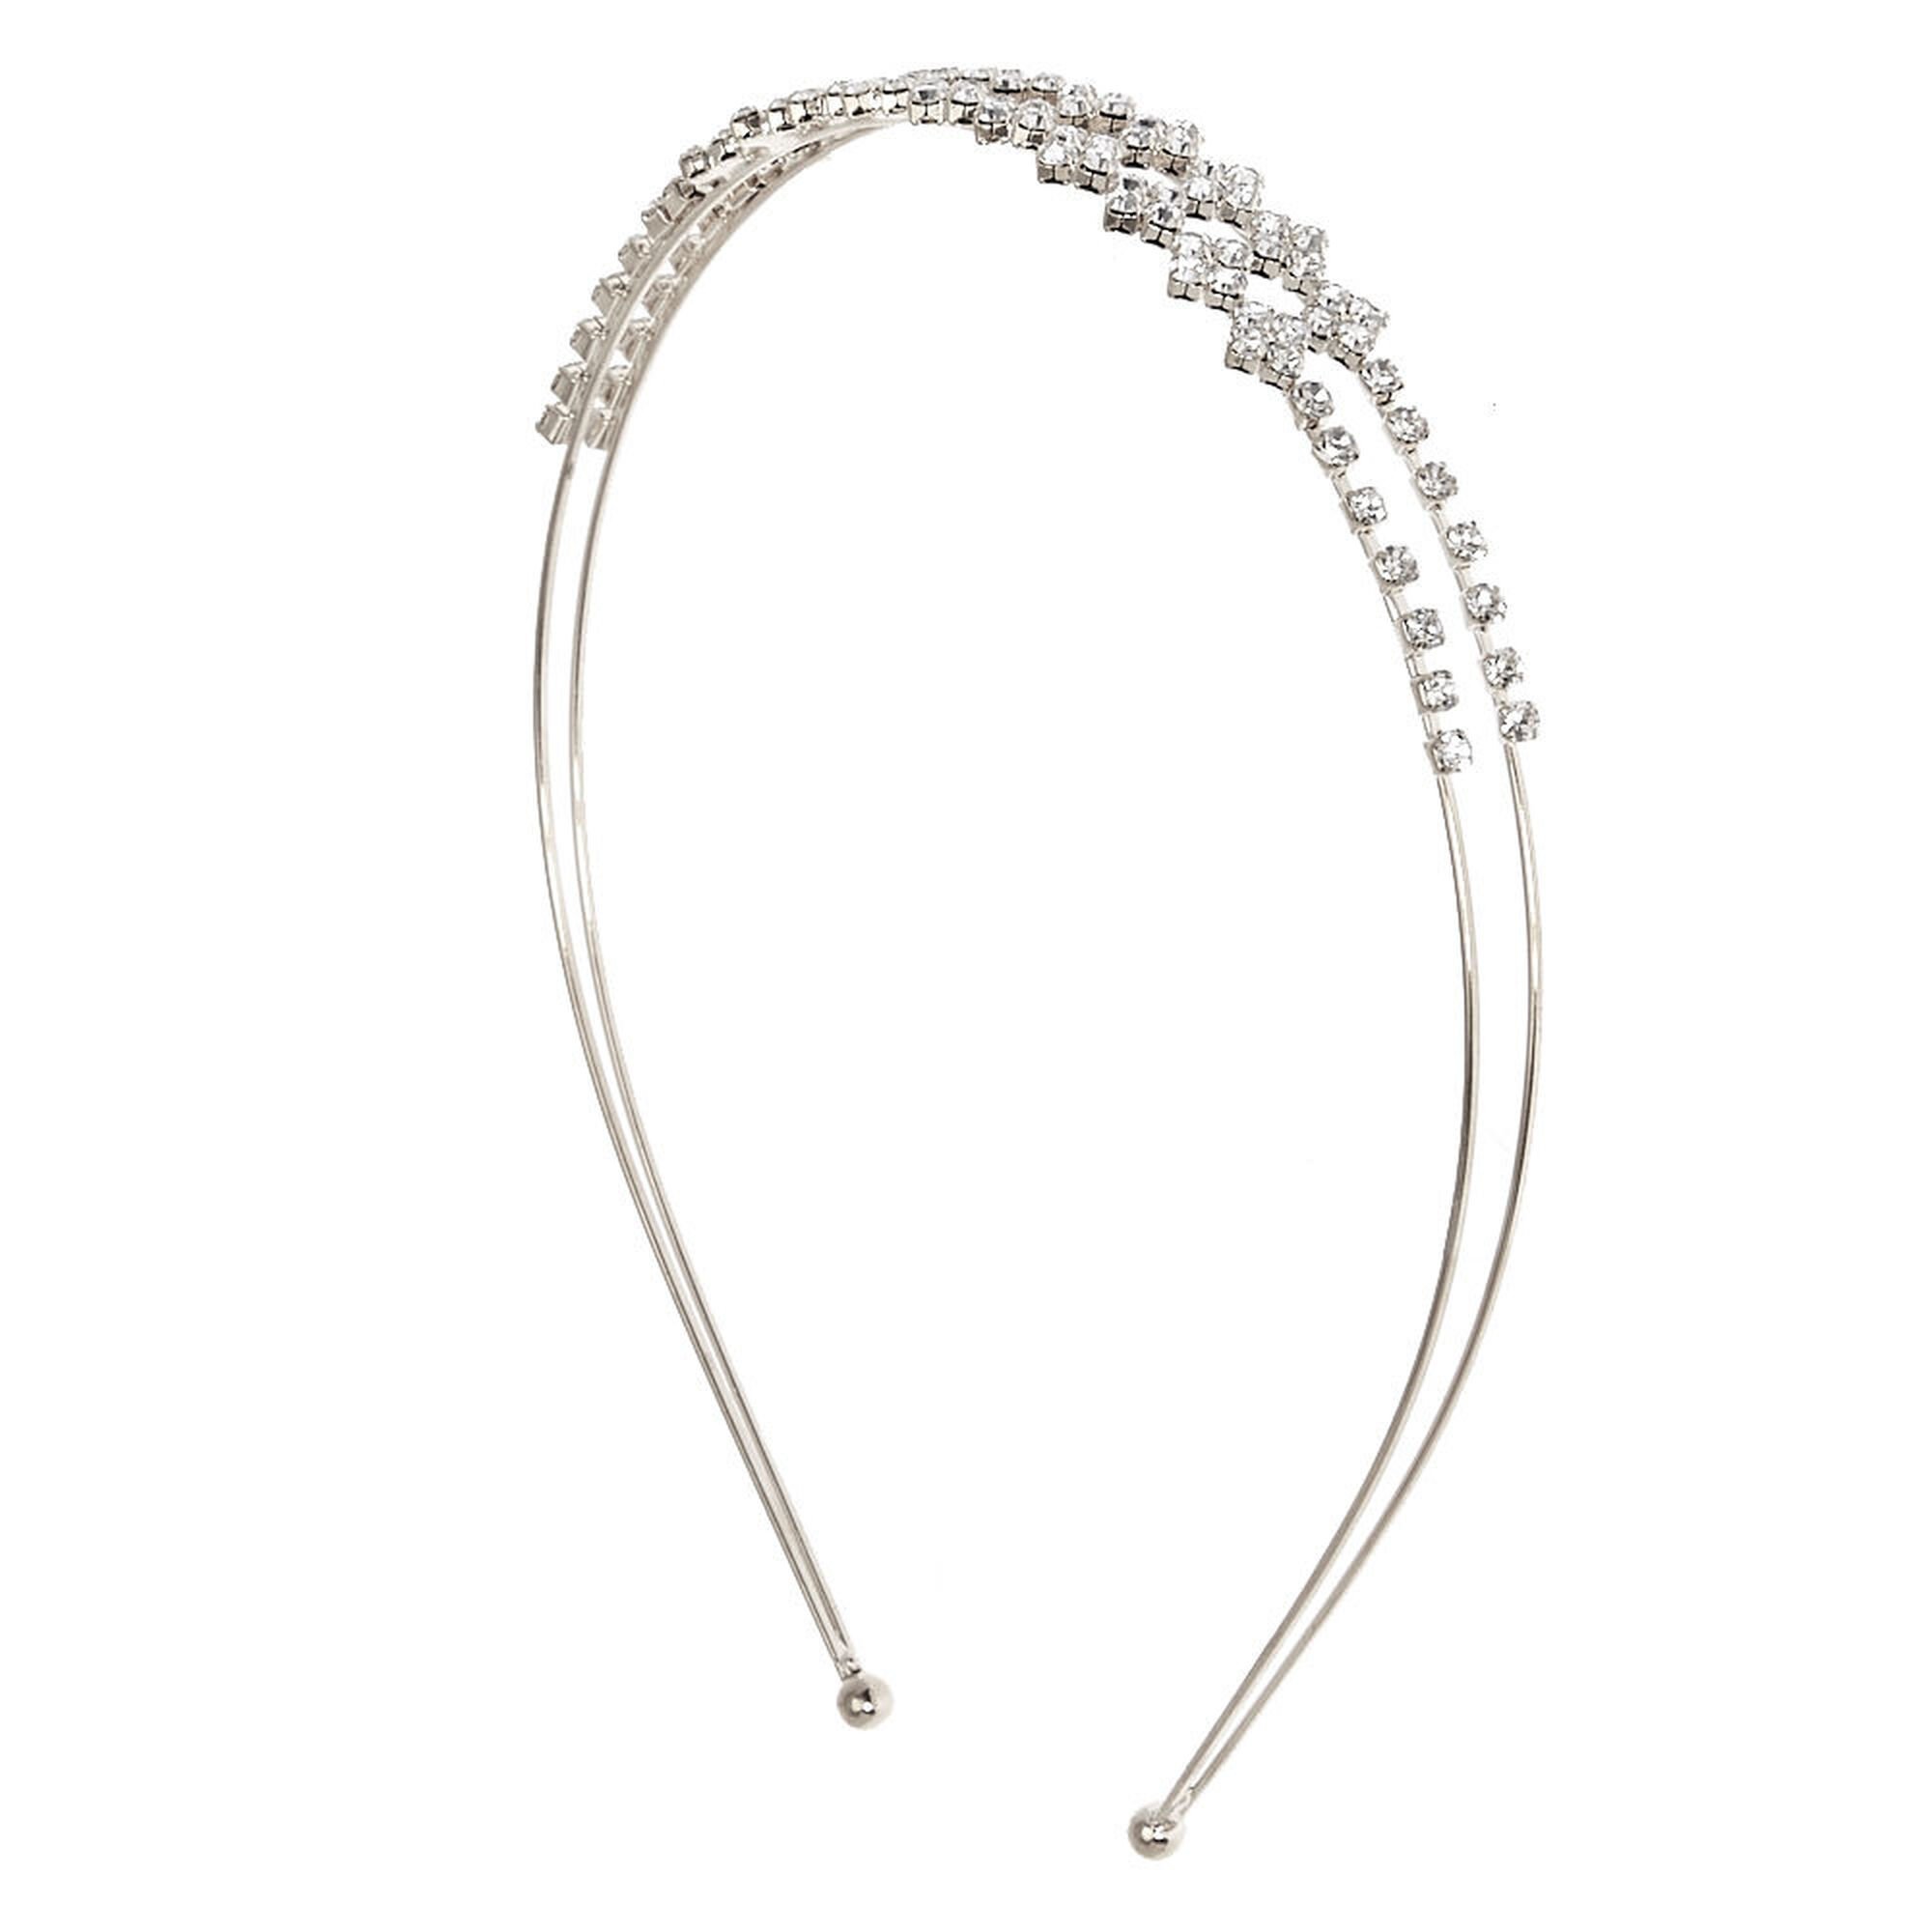 View Claires Tone Rhinestone Double Row Headband Silver information